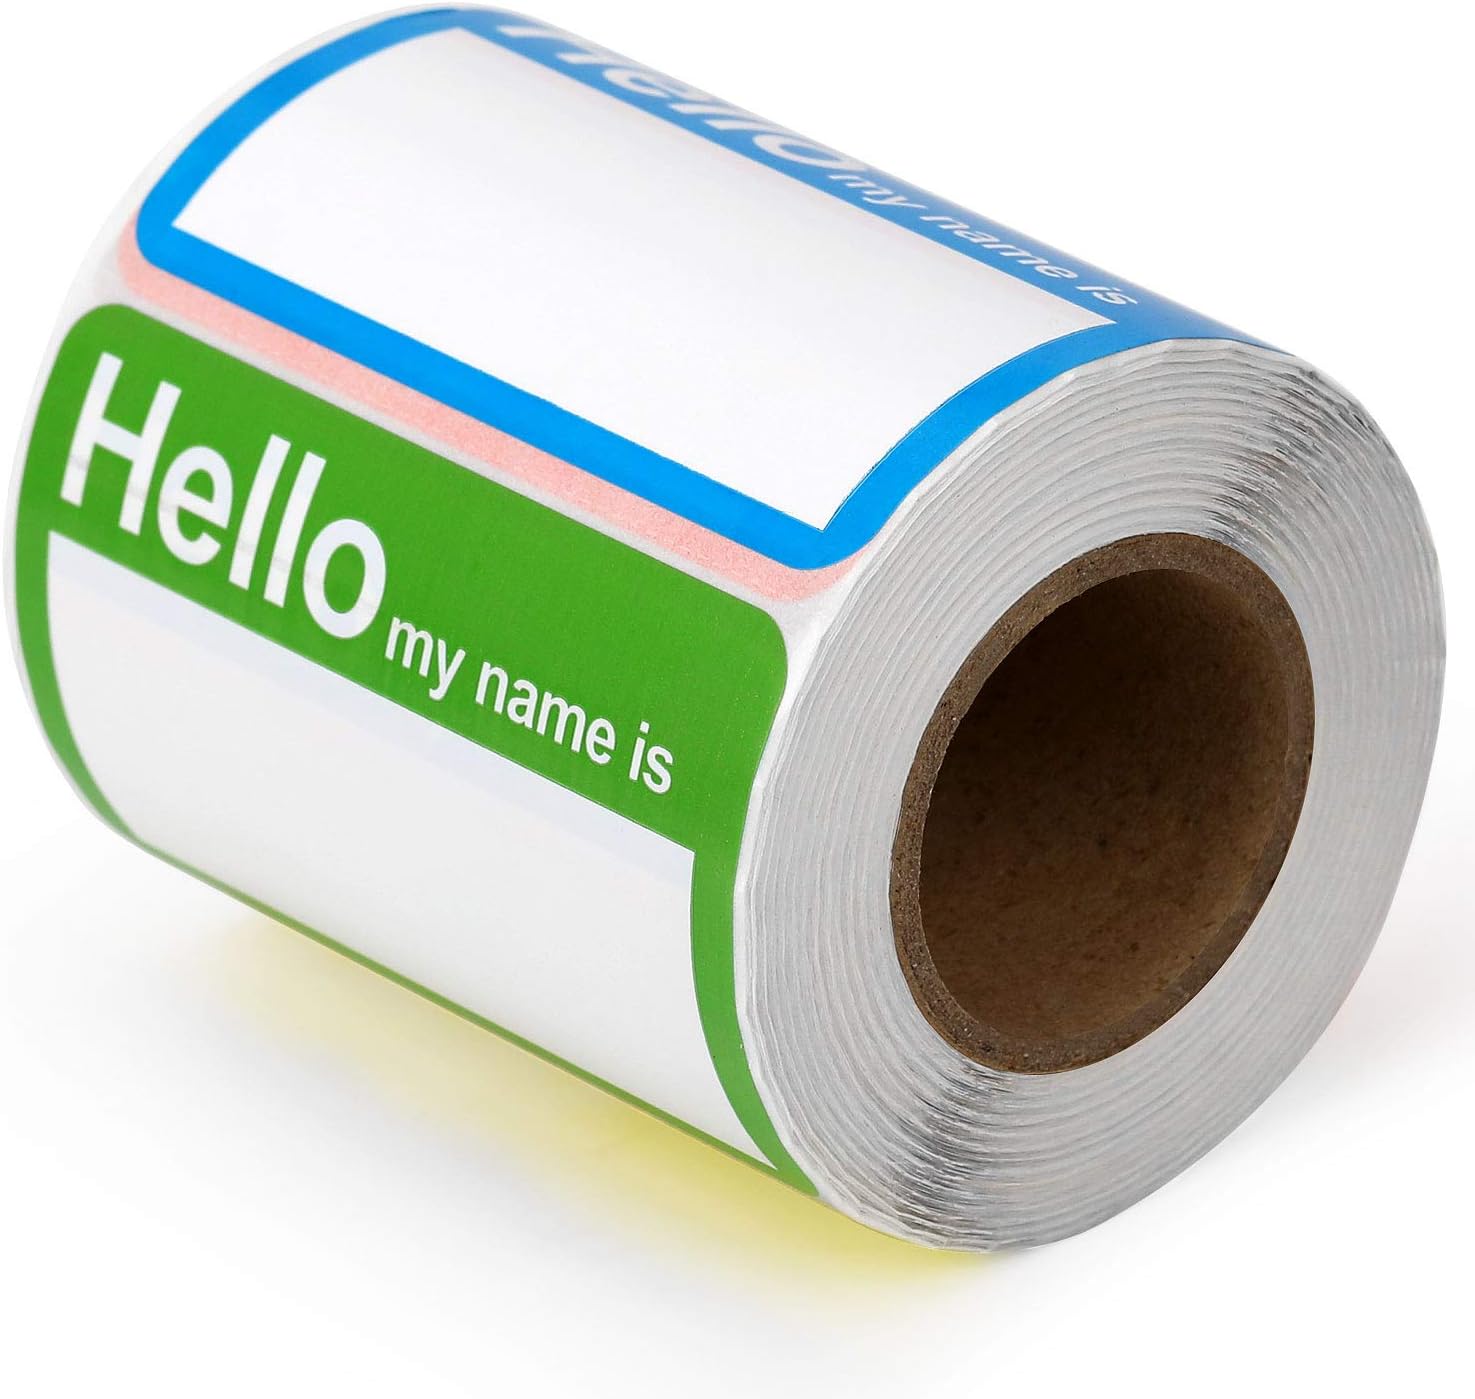 5 Colors (Hello My Name is) Name Tags Stickers 400 Labels - TTpen